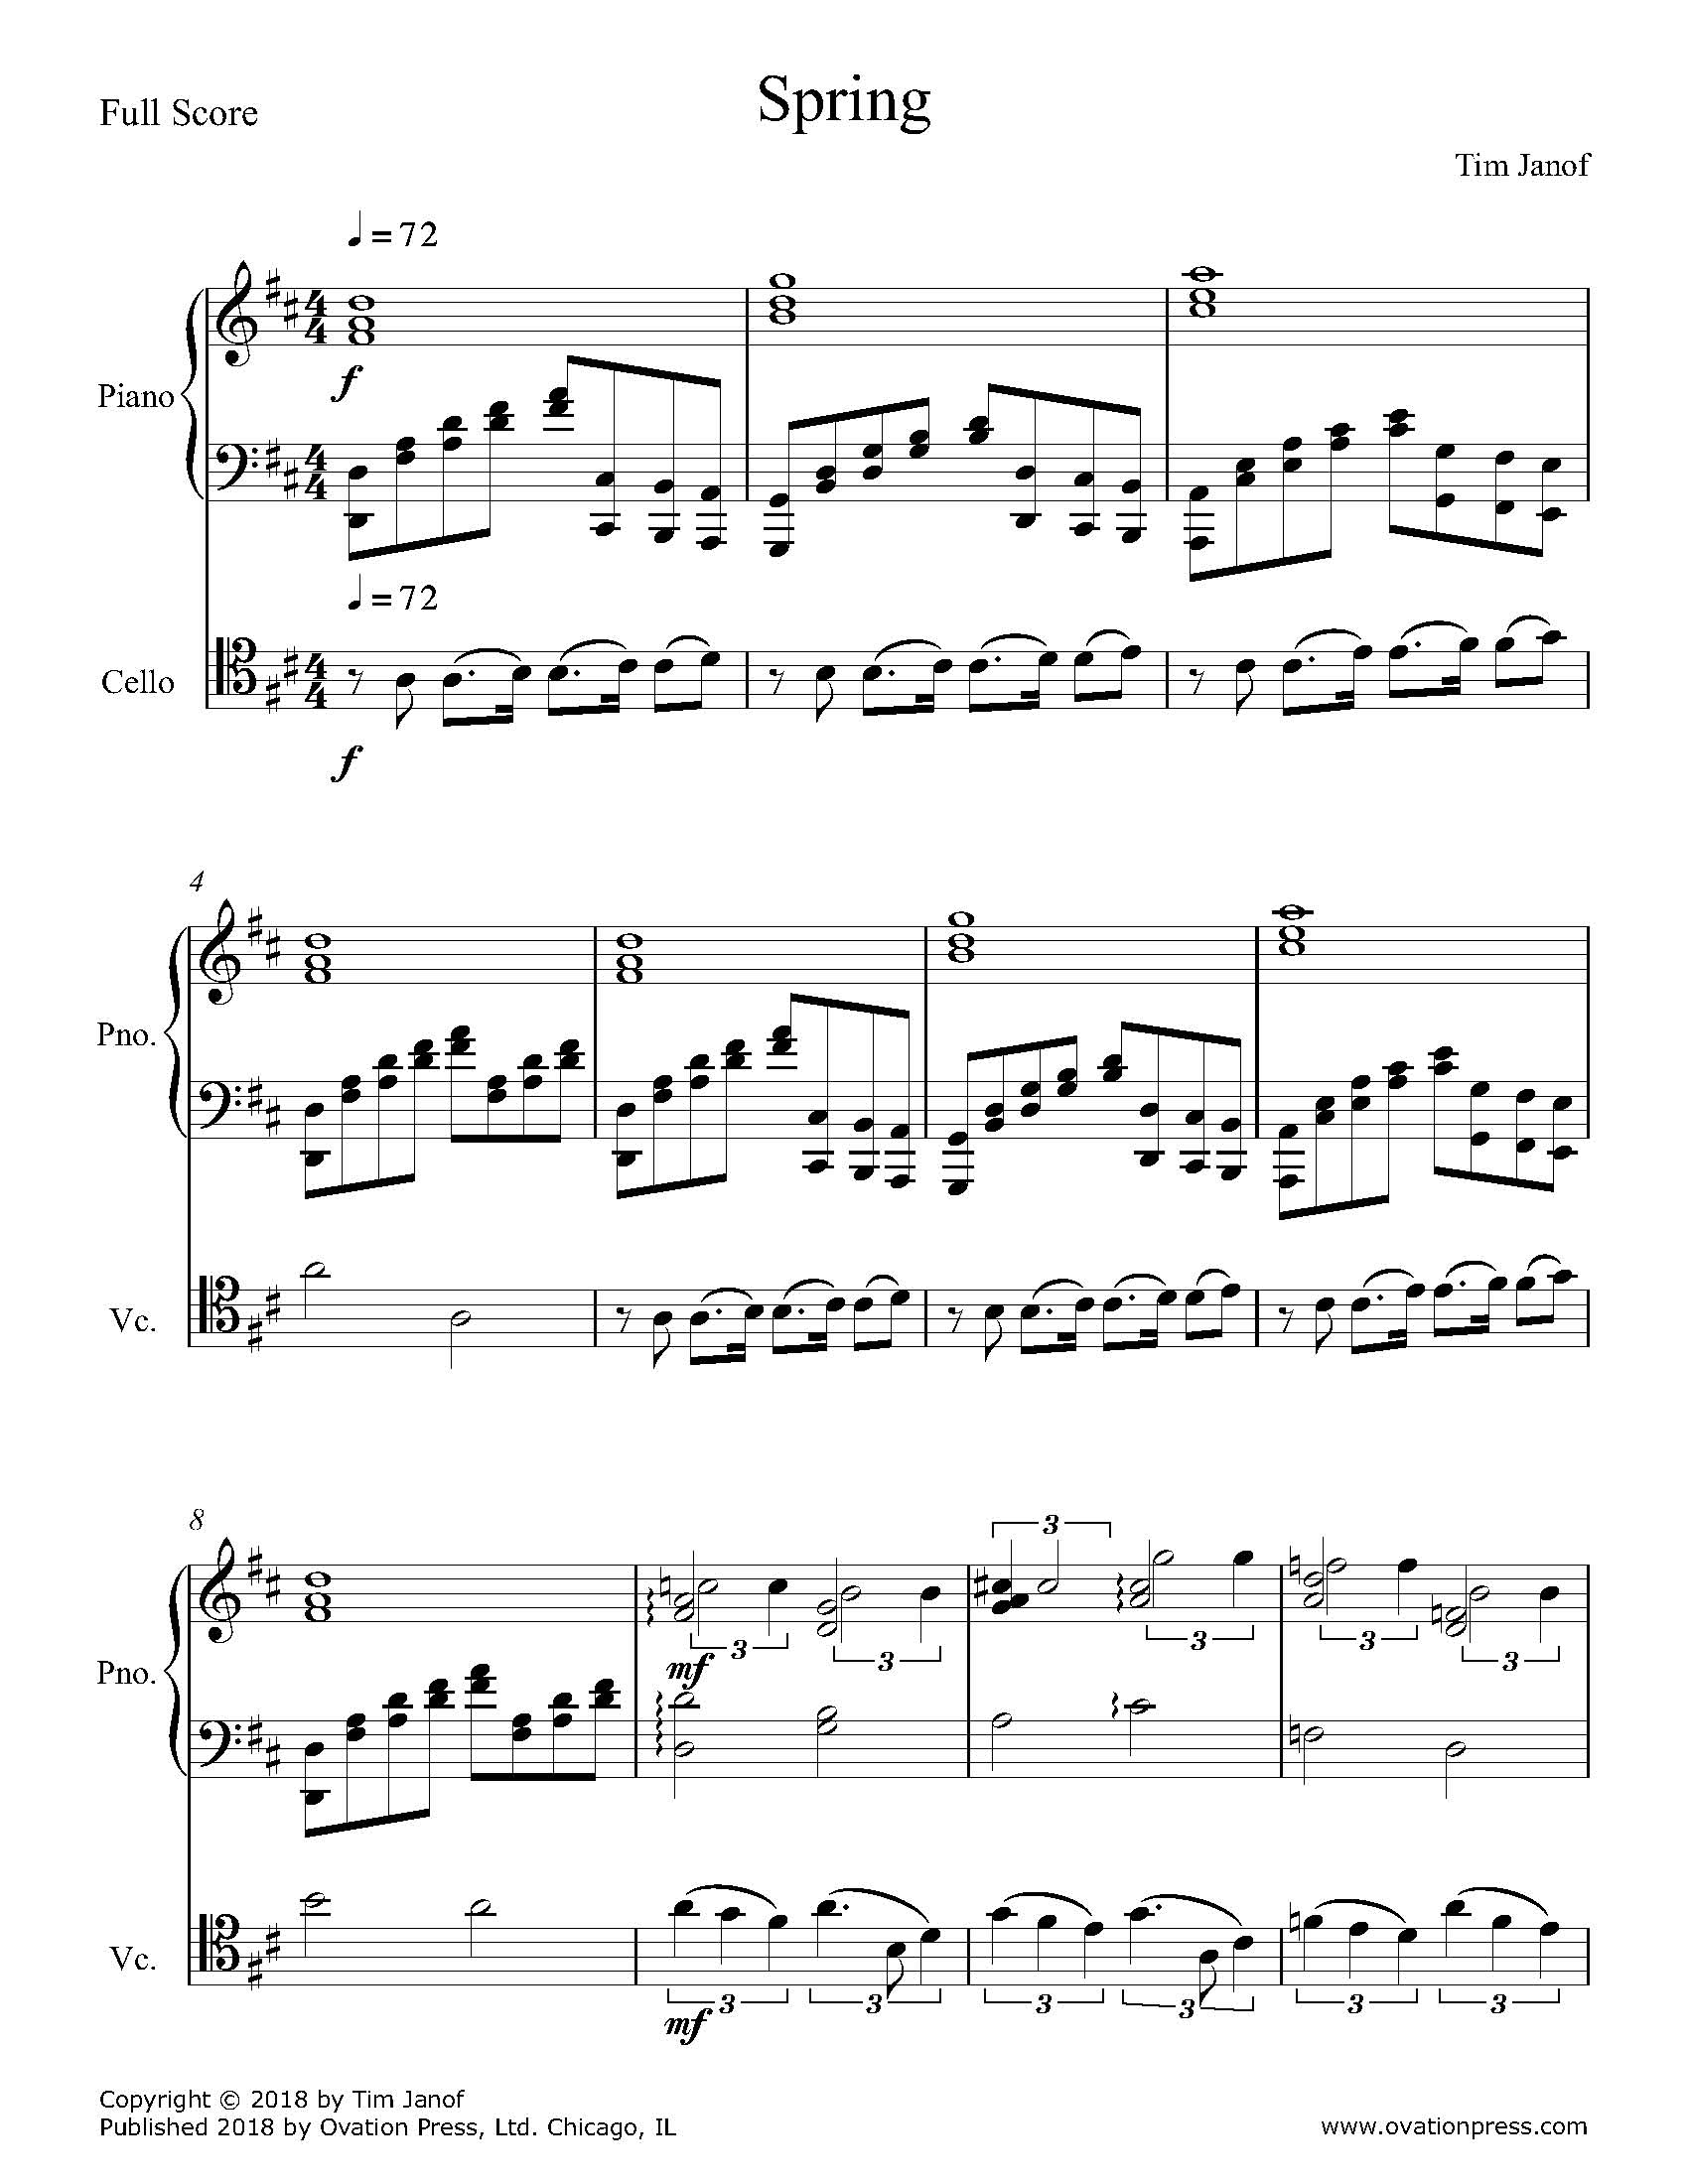 Spring for Cello and Piano by Tim Janof